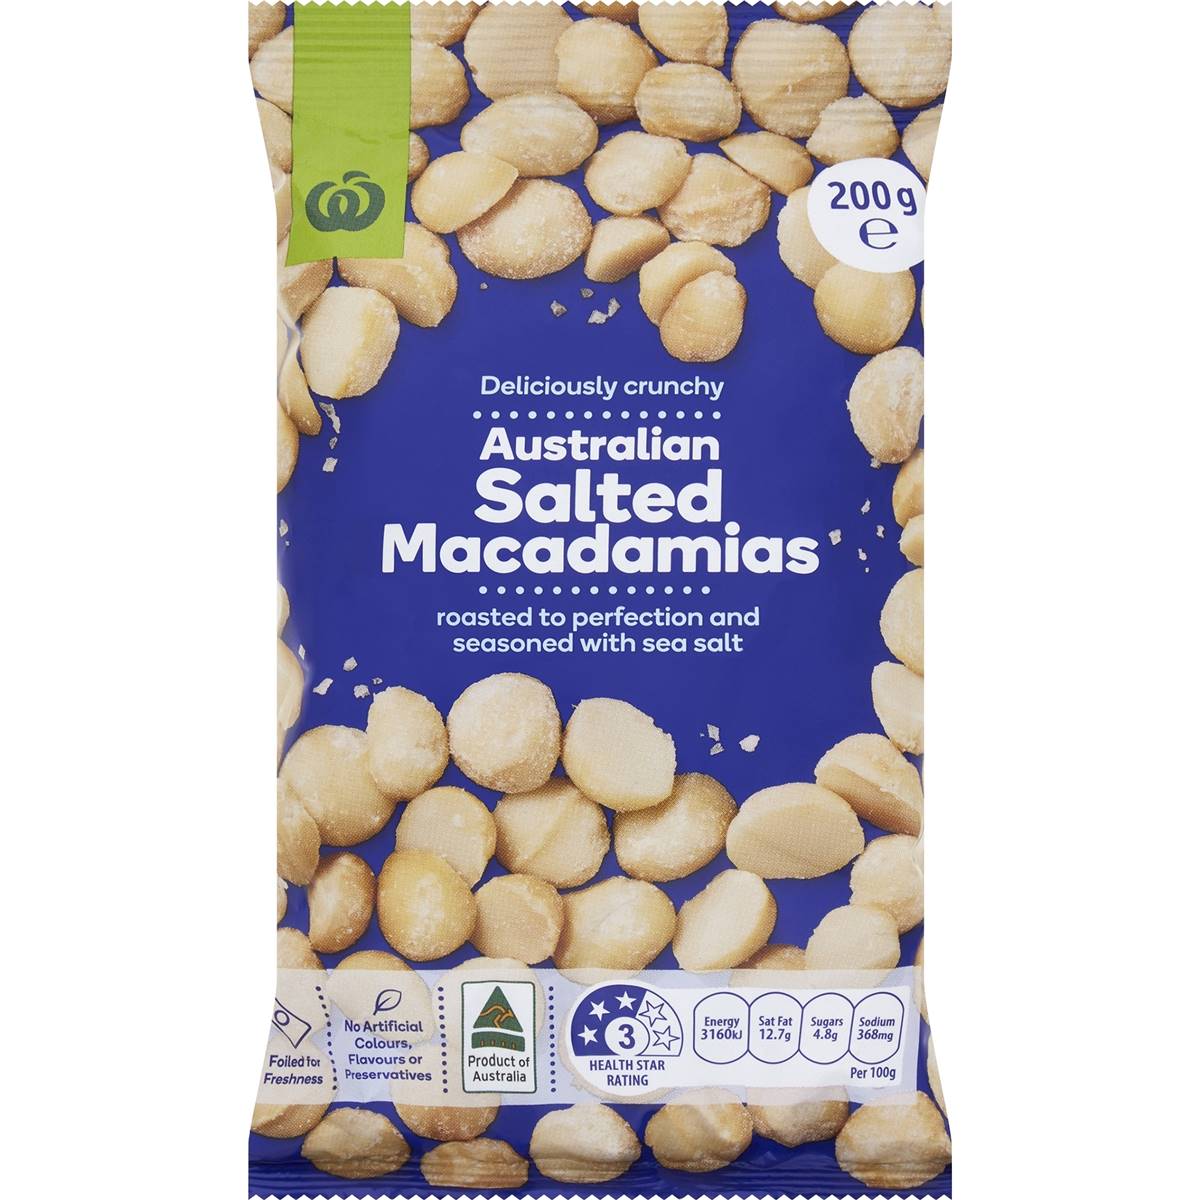 Calories in Woolworths Salted Macadamias